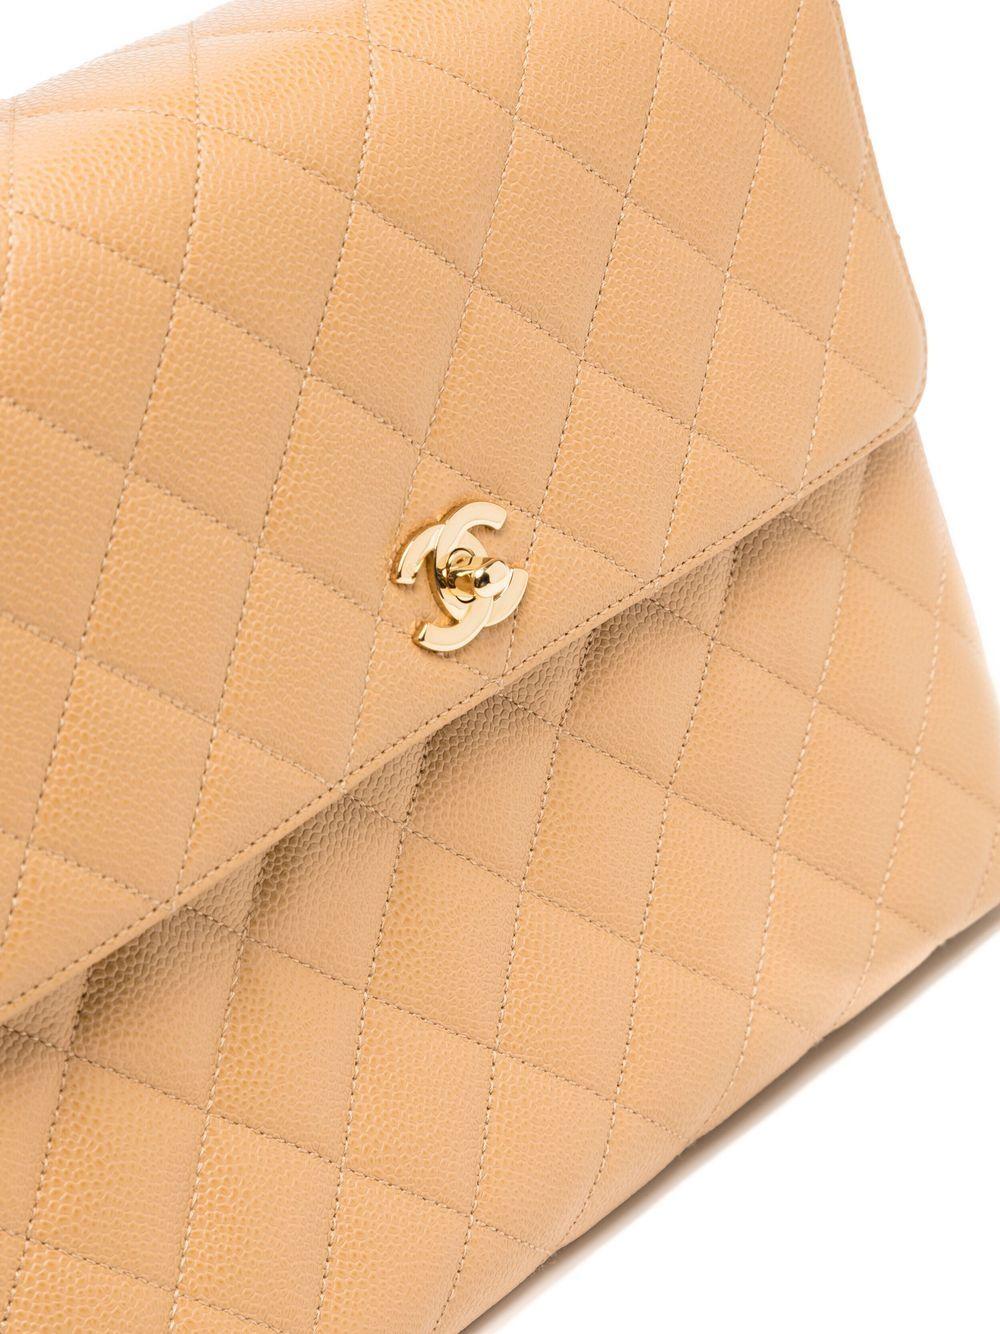 Orange Chanel 2001 Rare Vintage Kelly Top Handle Beige Quilted Caviar Classic Flap Bag  For Sale